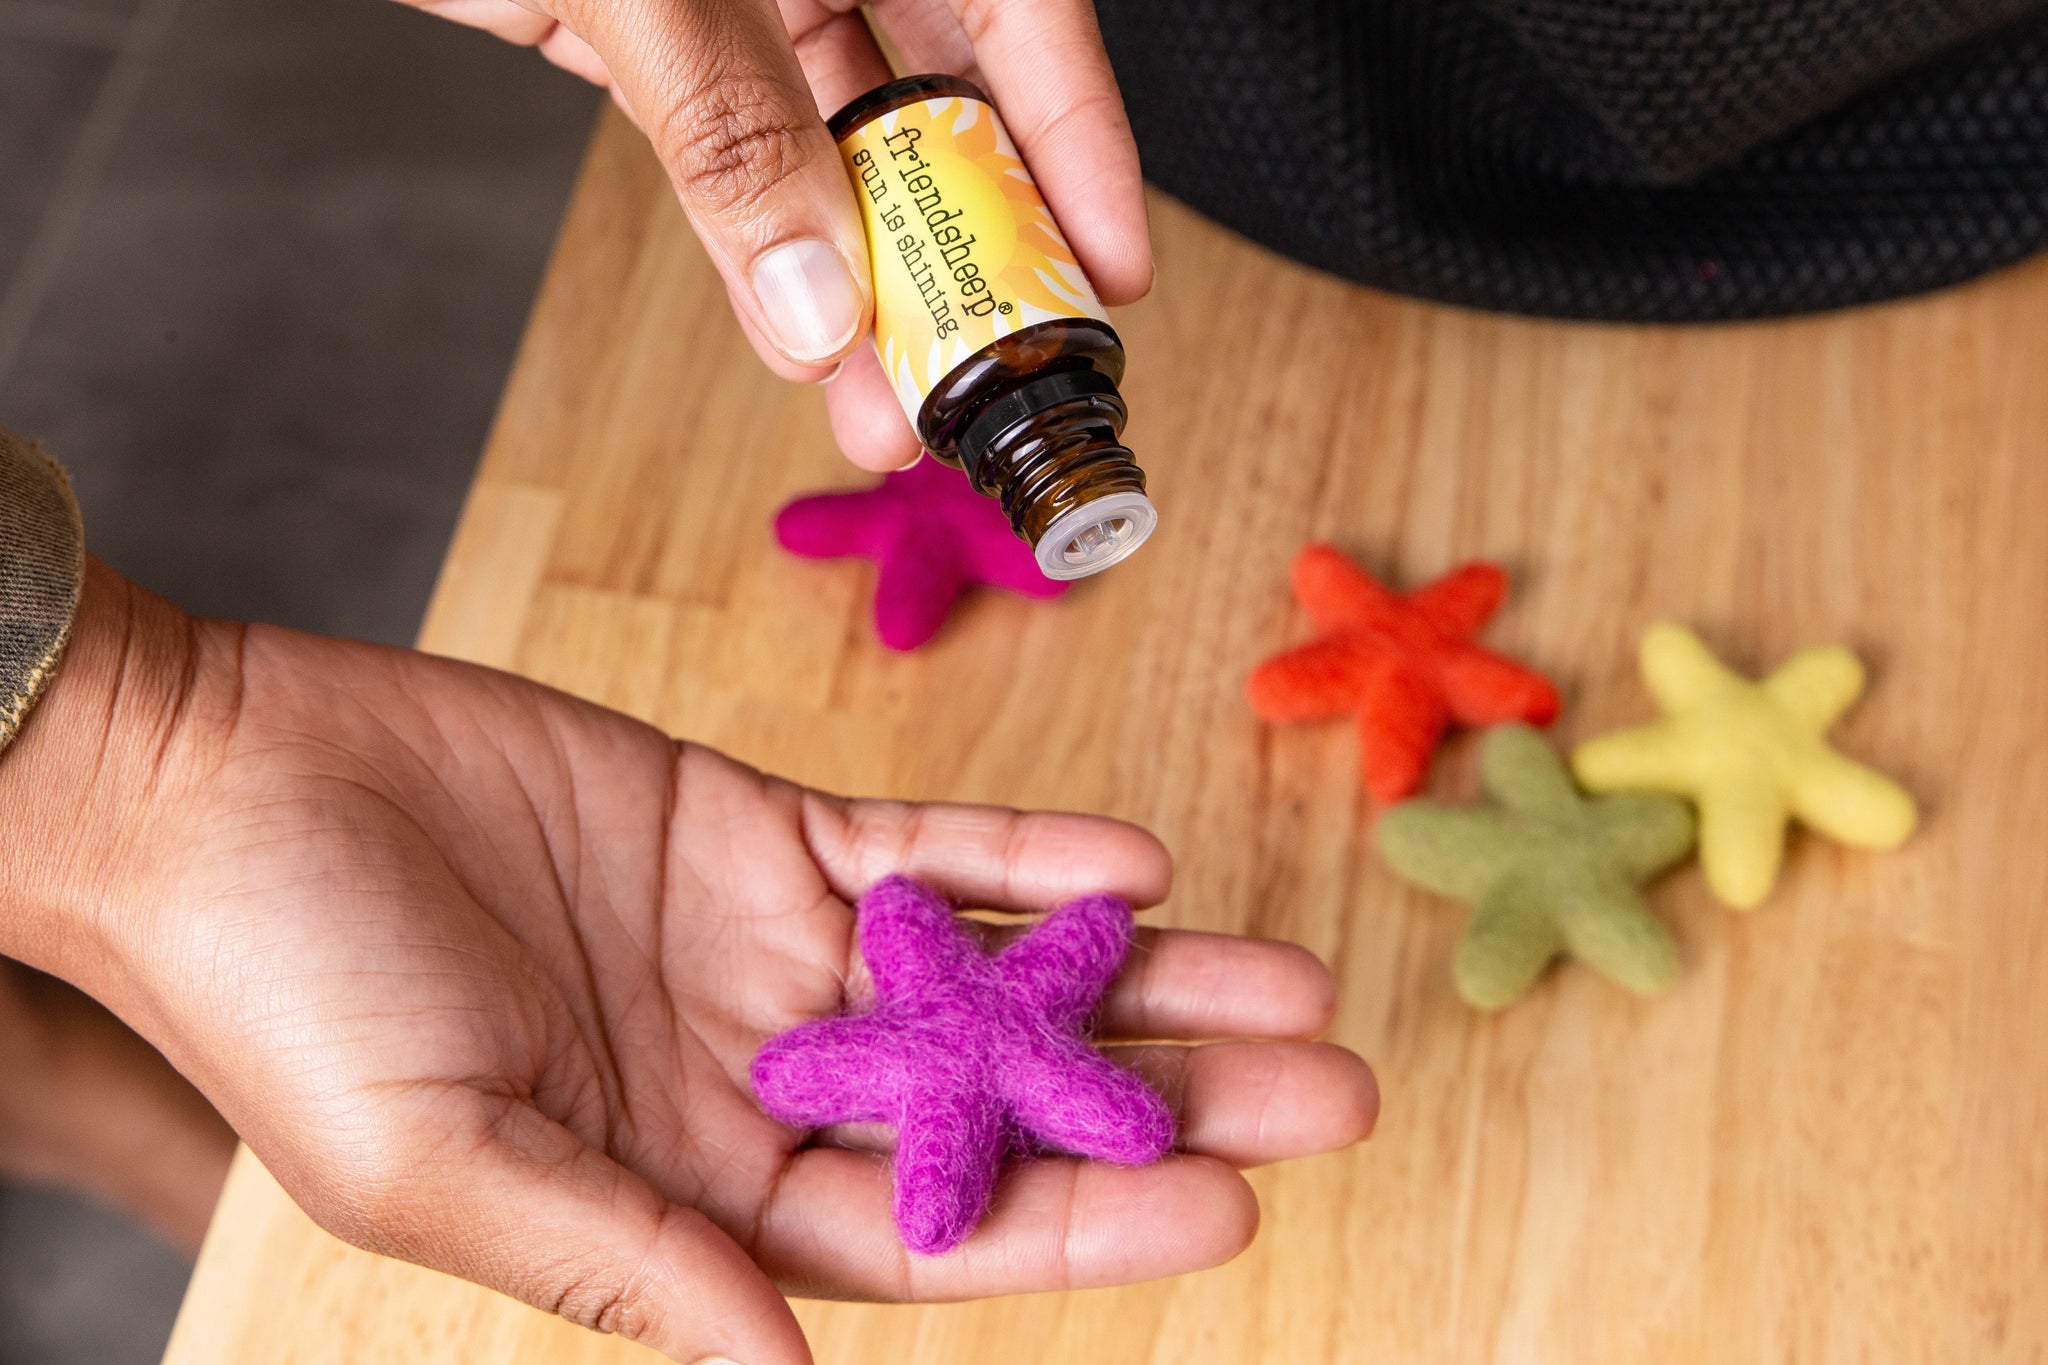 A violet star freshener is in a hand. The other hand is dropping some essential oil on it. On the background 4 more colorful star fresheners